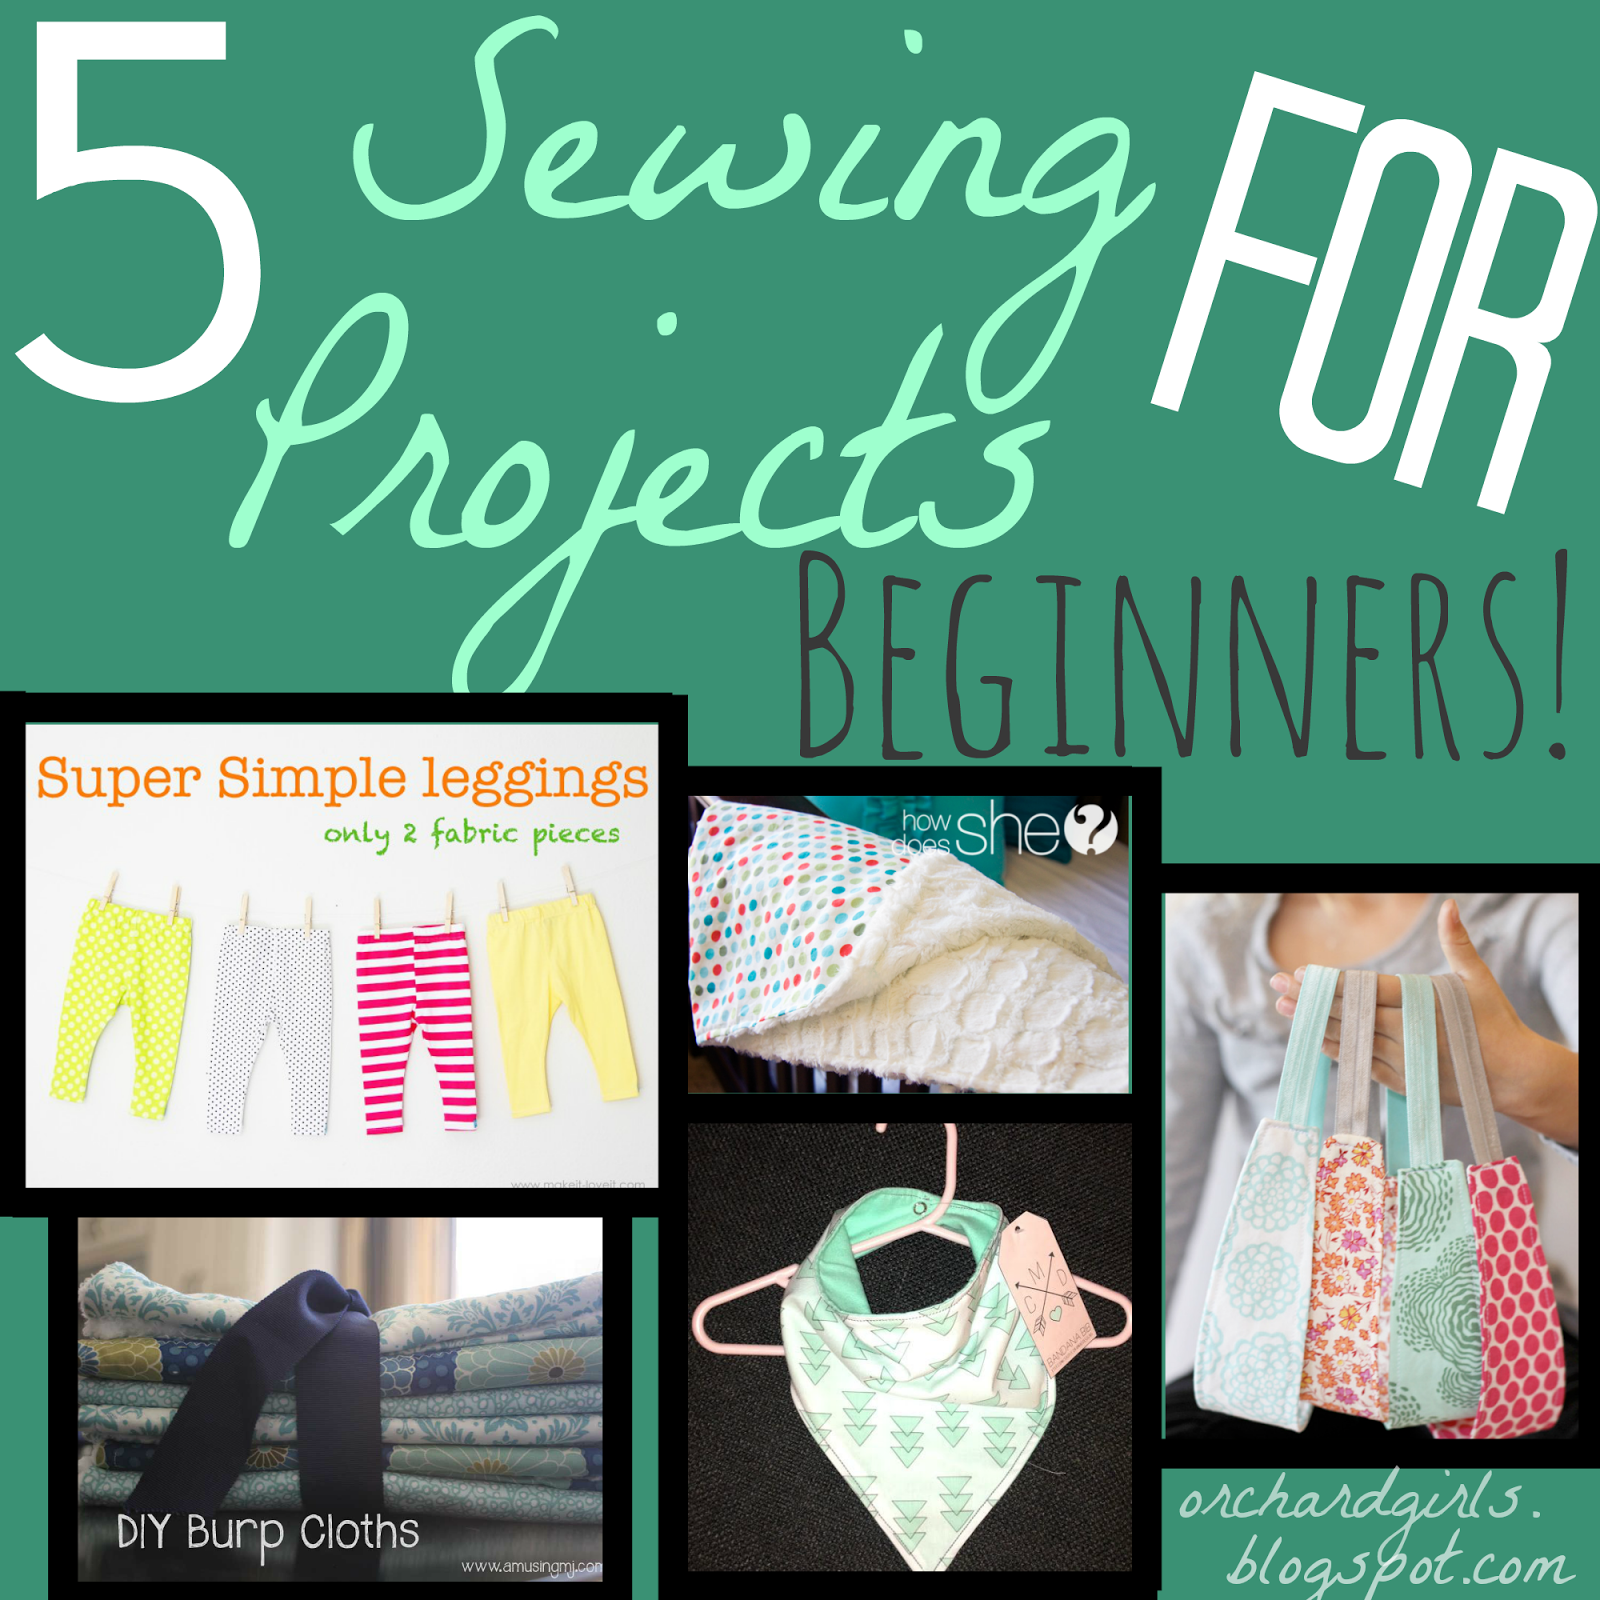 5 Sewing Projects for Begginers